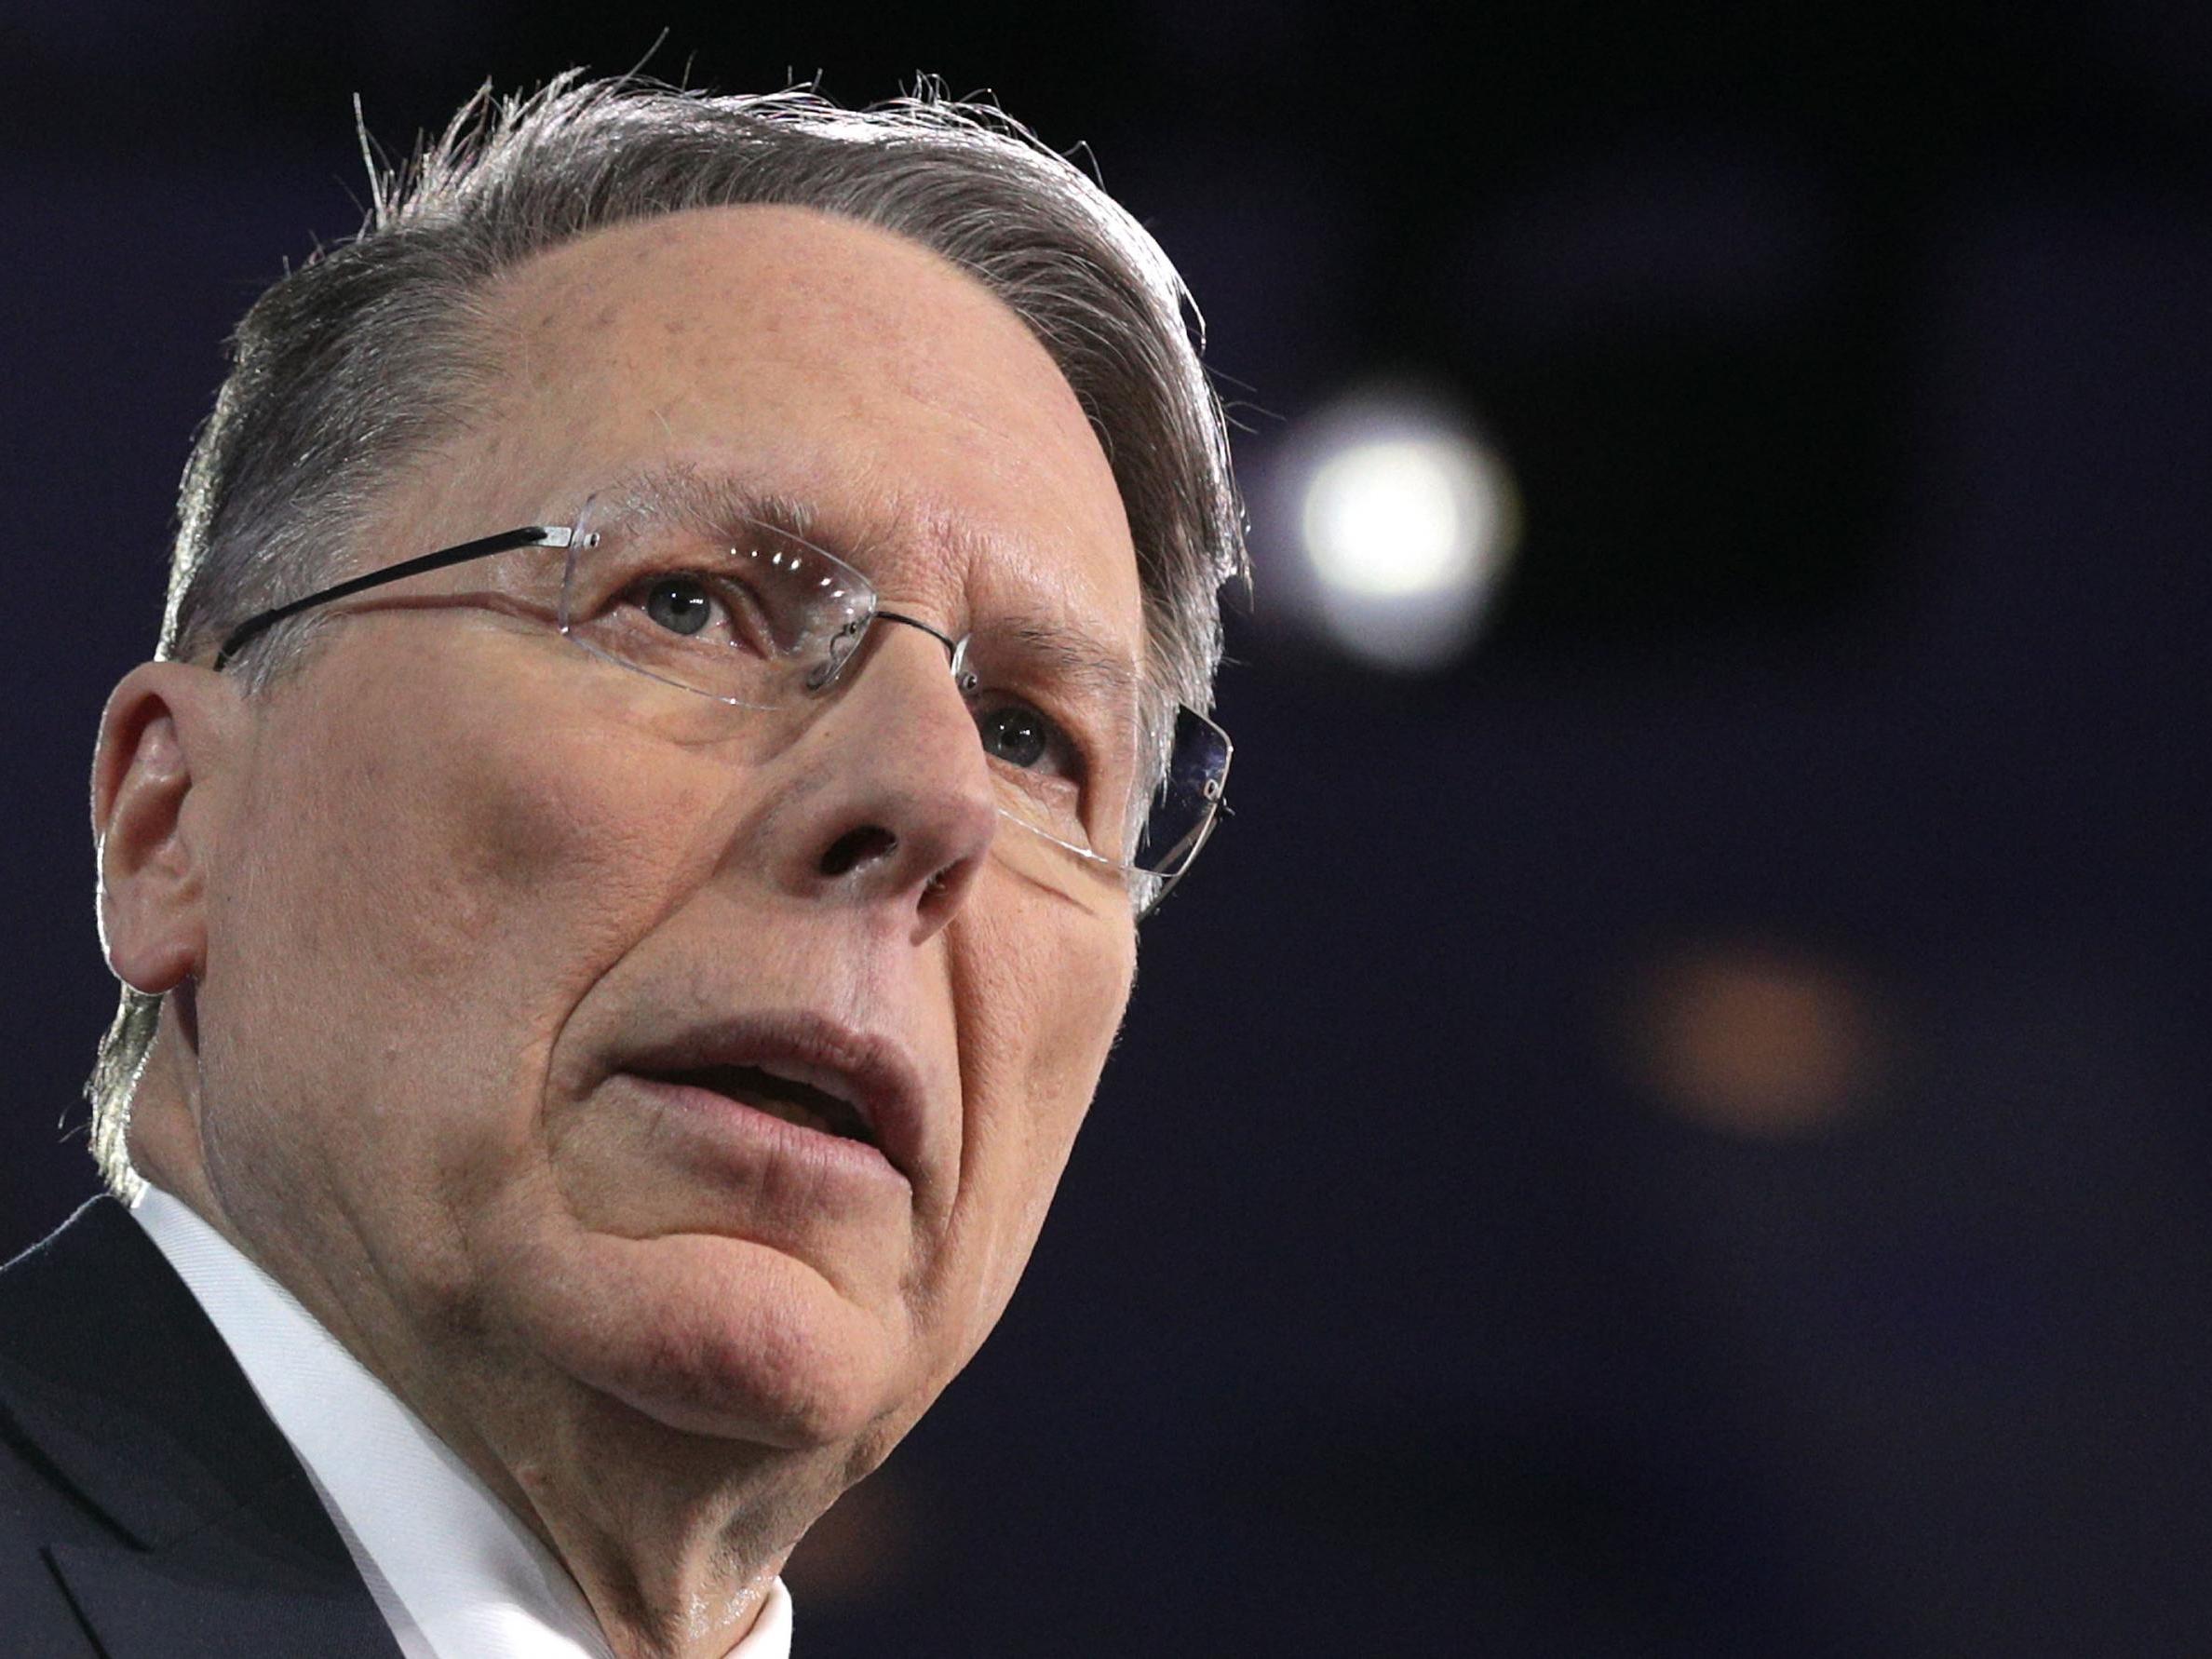 Coup underway to oust longstanding NRA chief executive Wayne LaPierre